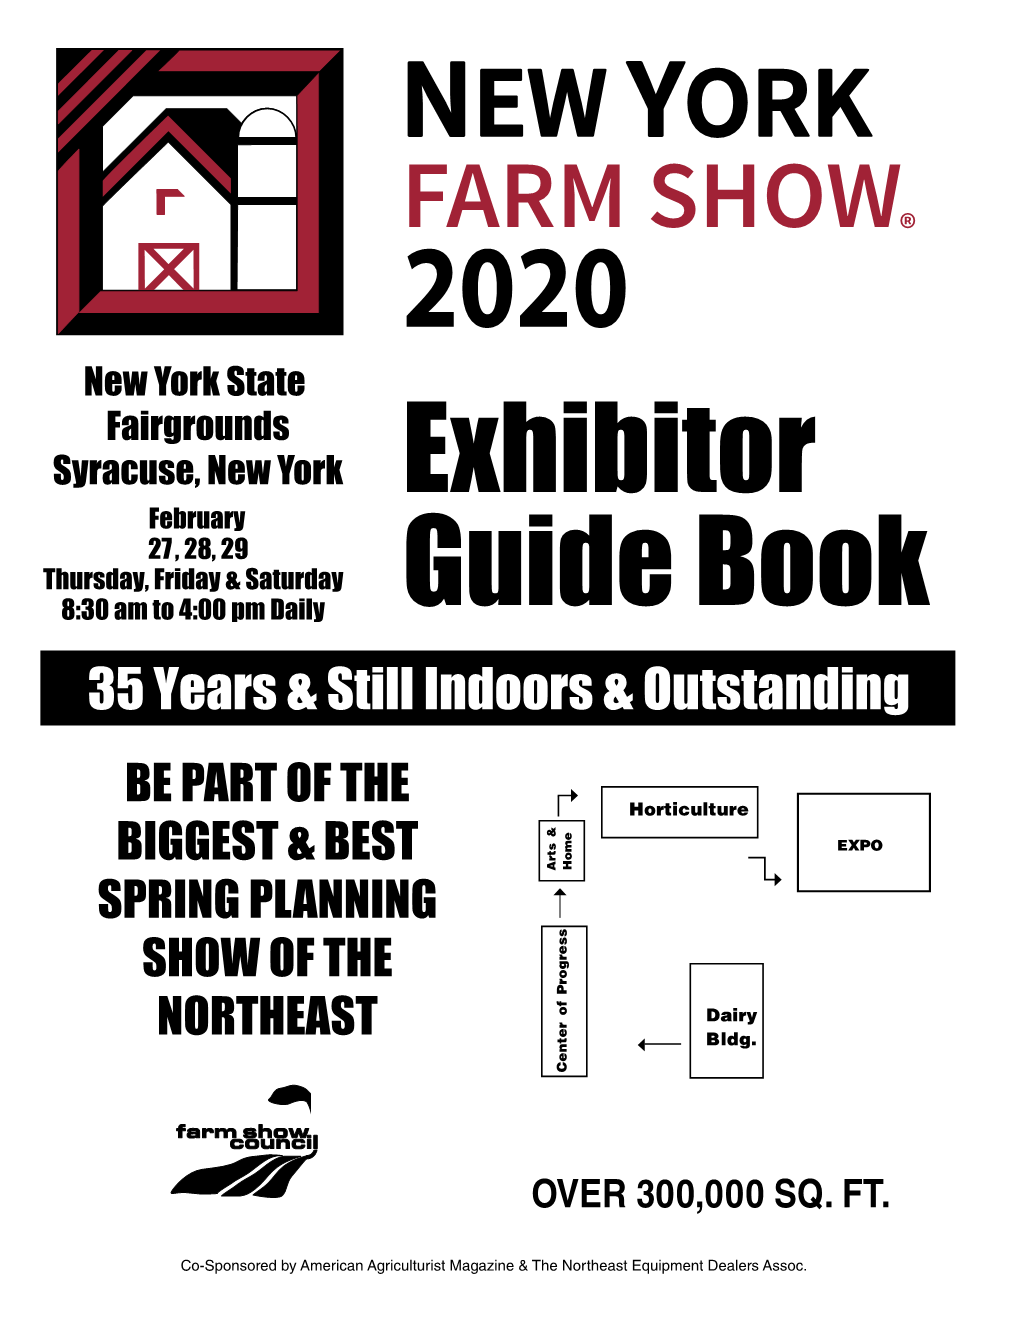 Exhibitor Guide Book to Be Reviewed and Service Order Forms in the Back of This Book to Be Completed and Returned